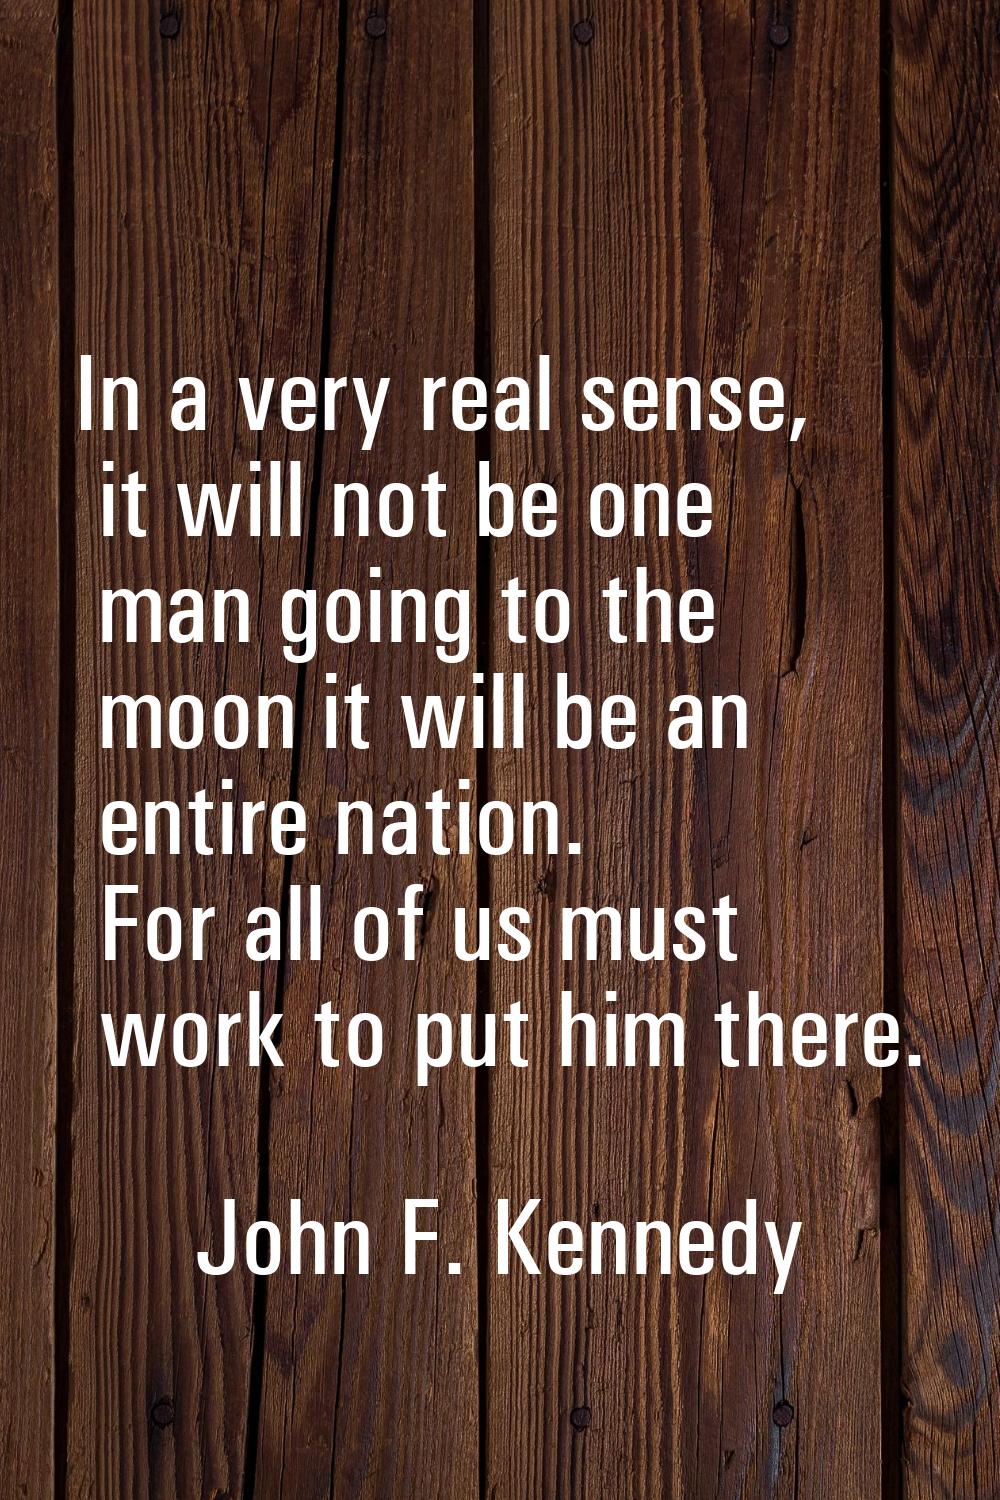 In a very real sense, it will not be one man going to the moon it will be an entire nation. For all